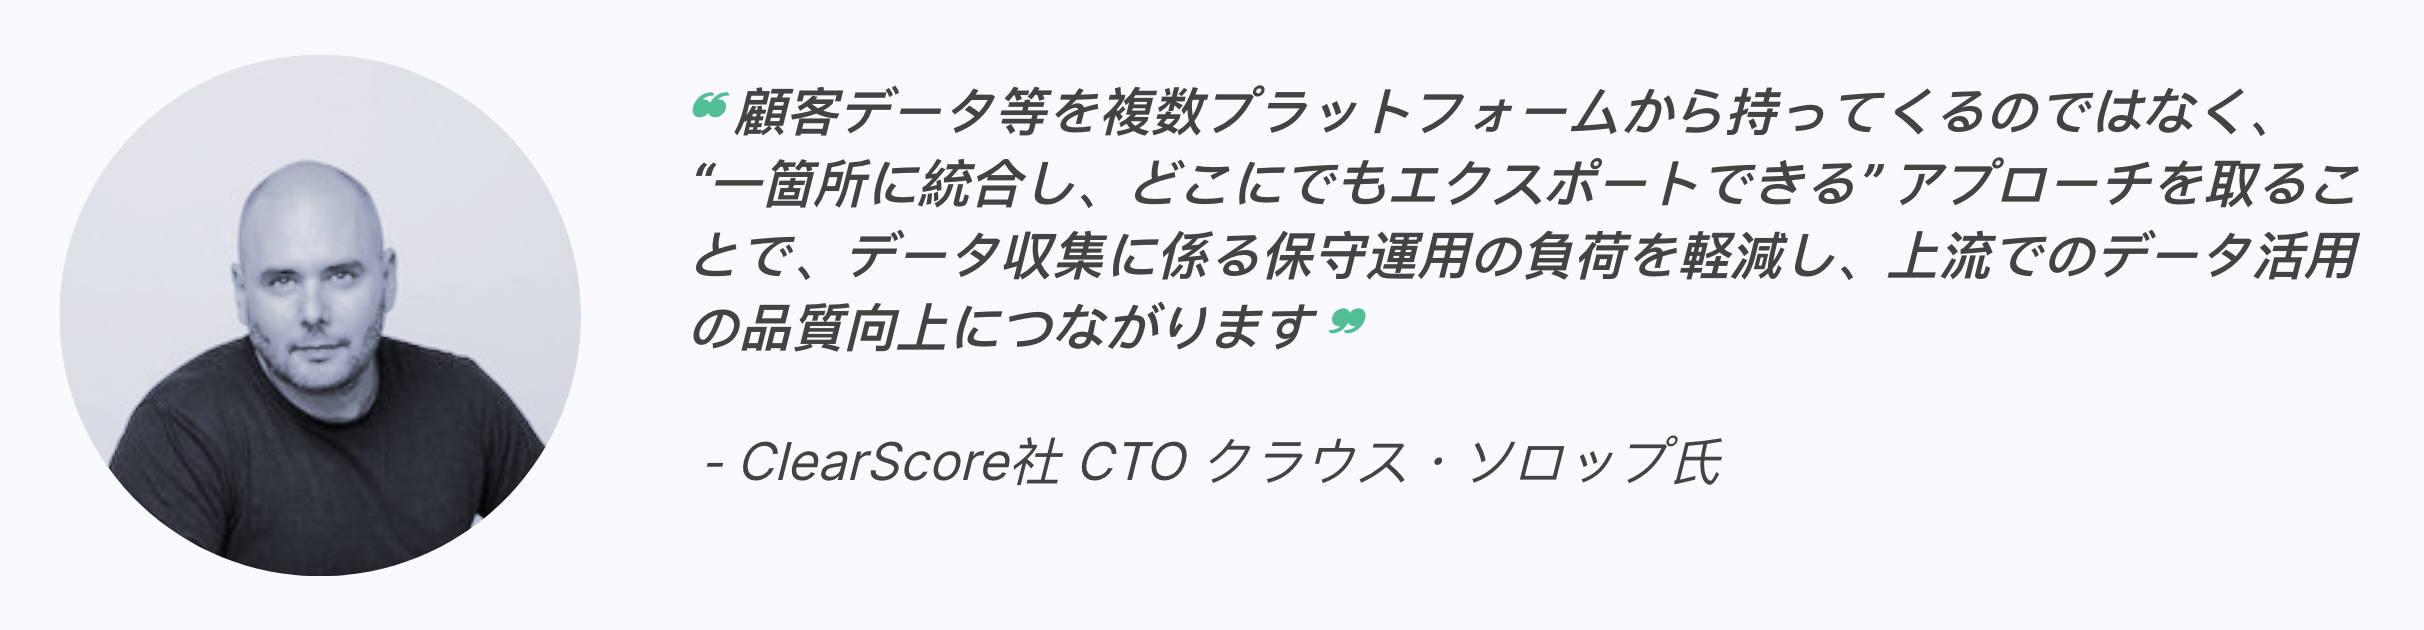 Quote from Klaus Thorup of ClearScore on data architecture JP